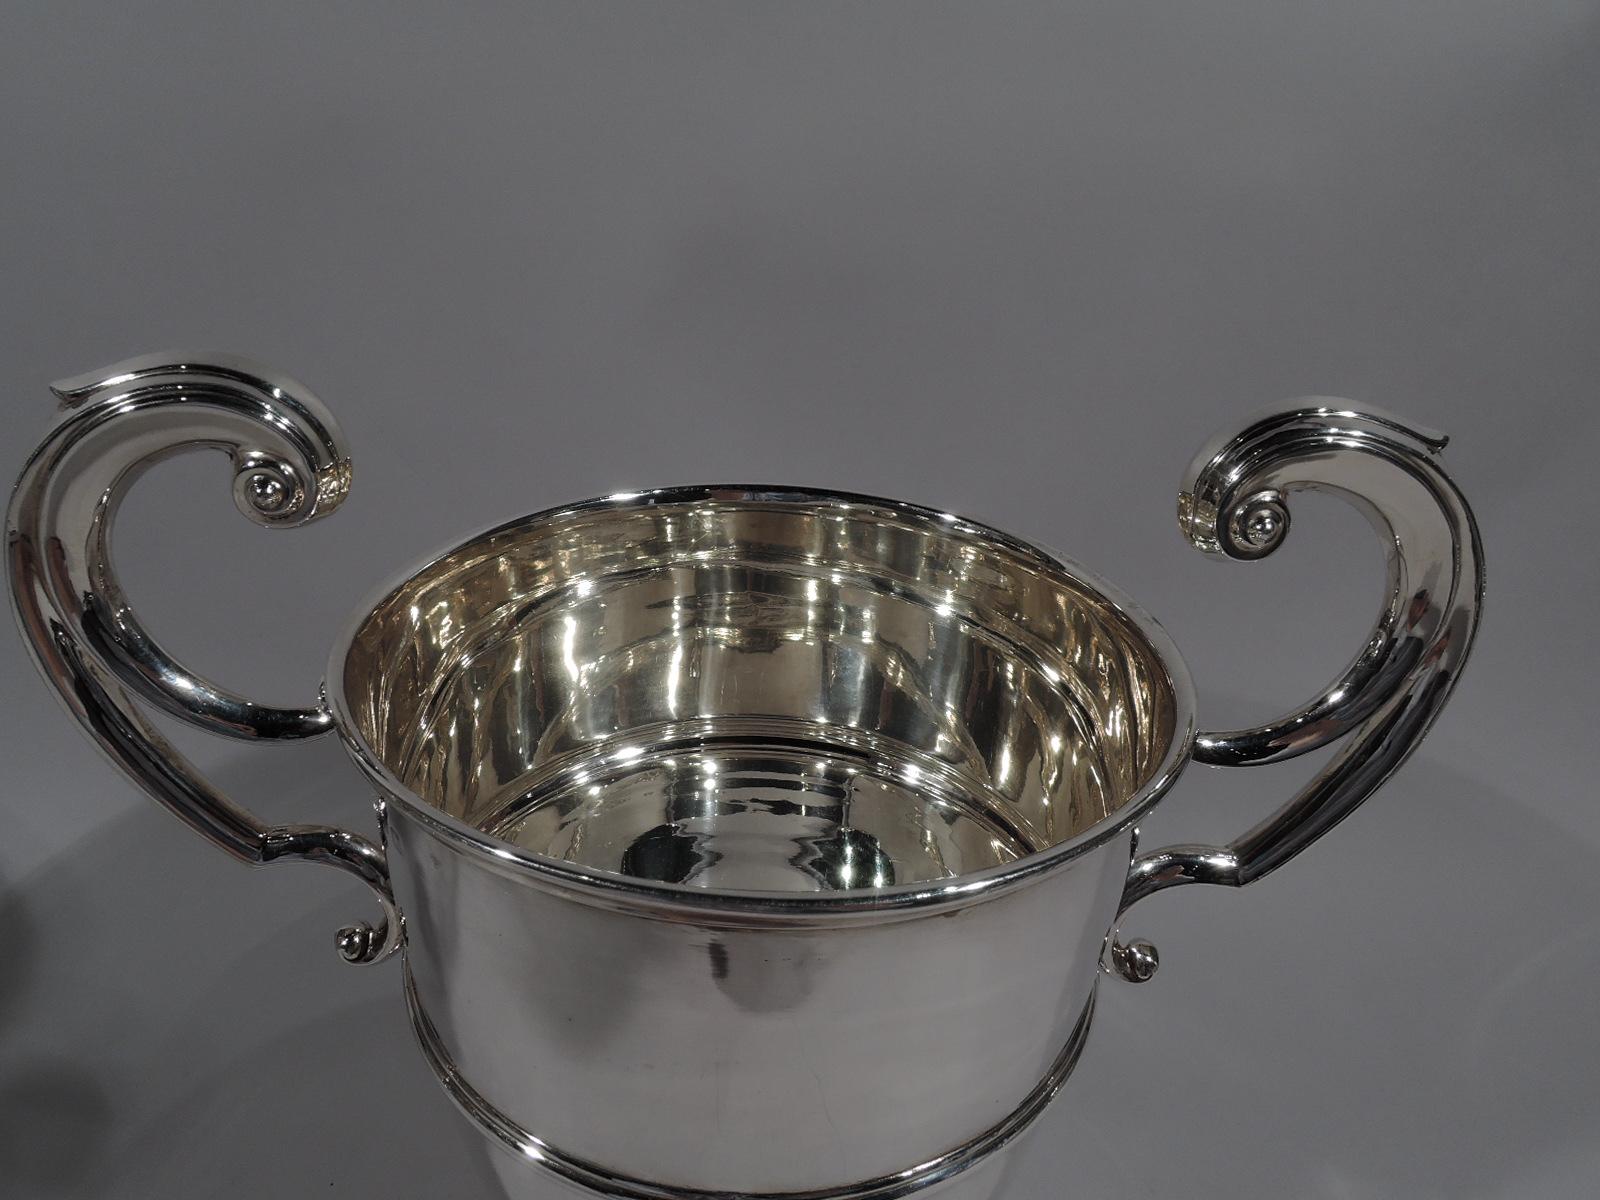 Irish Edwardian Georgian sterling silver trophy cup, 1906. Girdled urn with faceted and capped flying double-scroll side handles and domed foot. Traditional Classicism with lots of room for engraving. Fully marked including Dublin assay stamp and